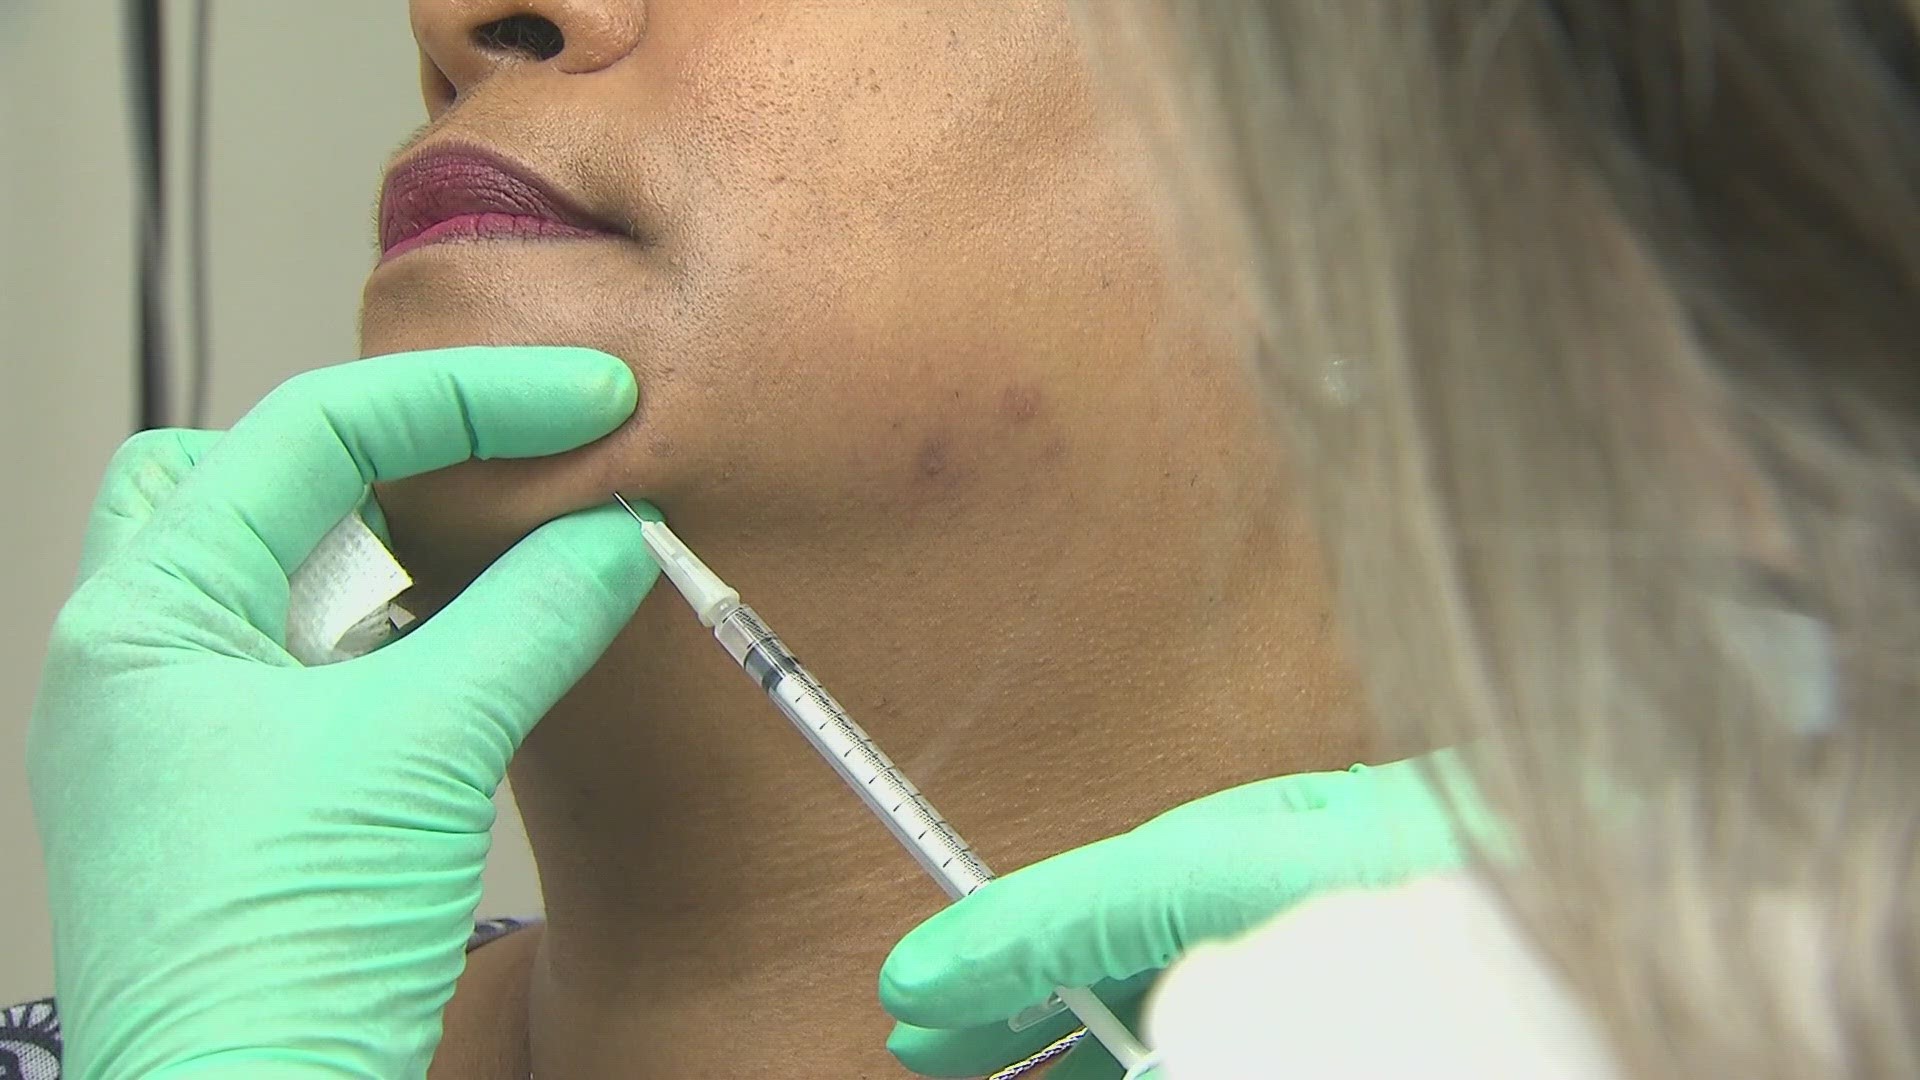 WUSA9 spoke with Megan Francis, Board Certified Nurse Practitioner in Virginia, about various things you should consider if interested in Botox procedures.